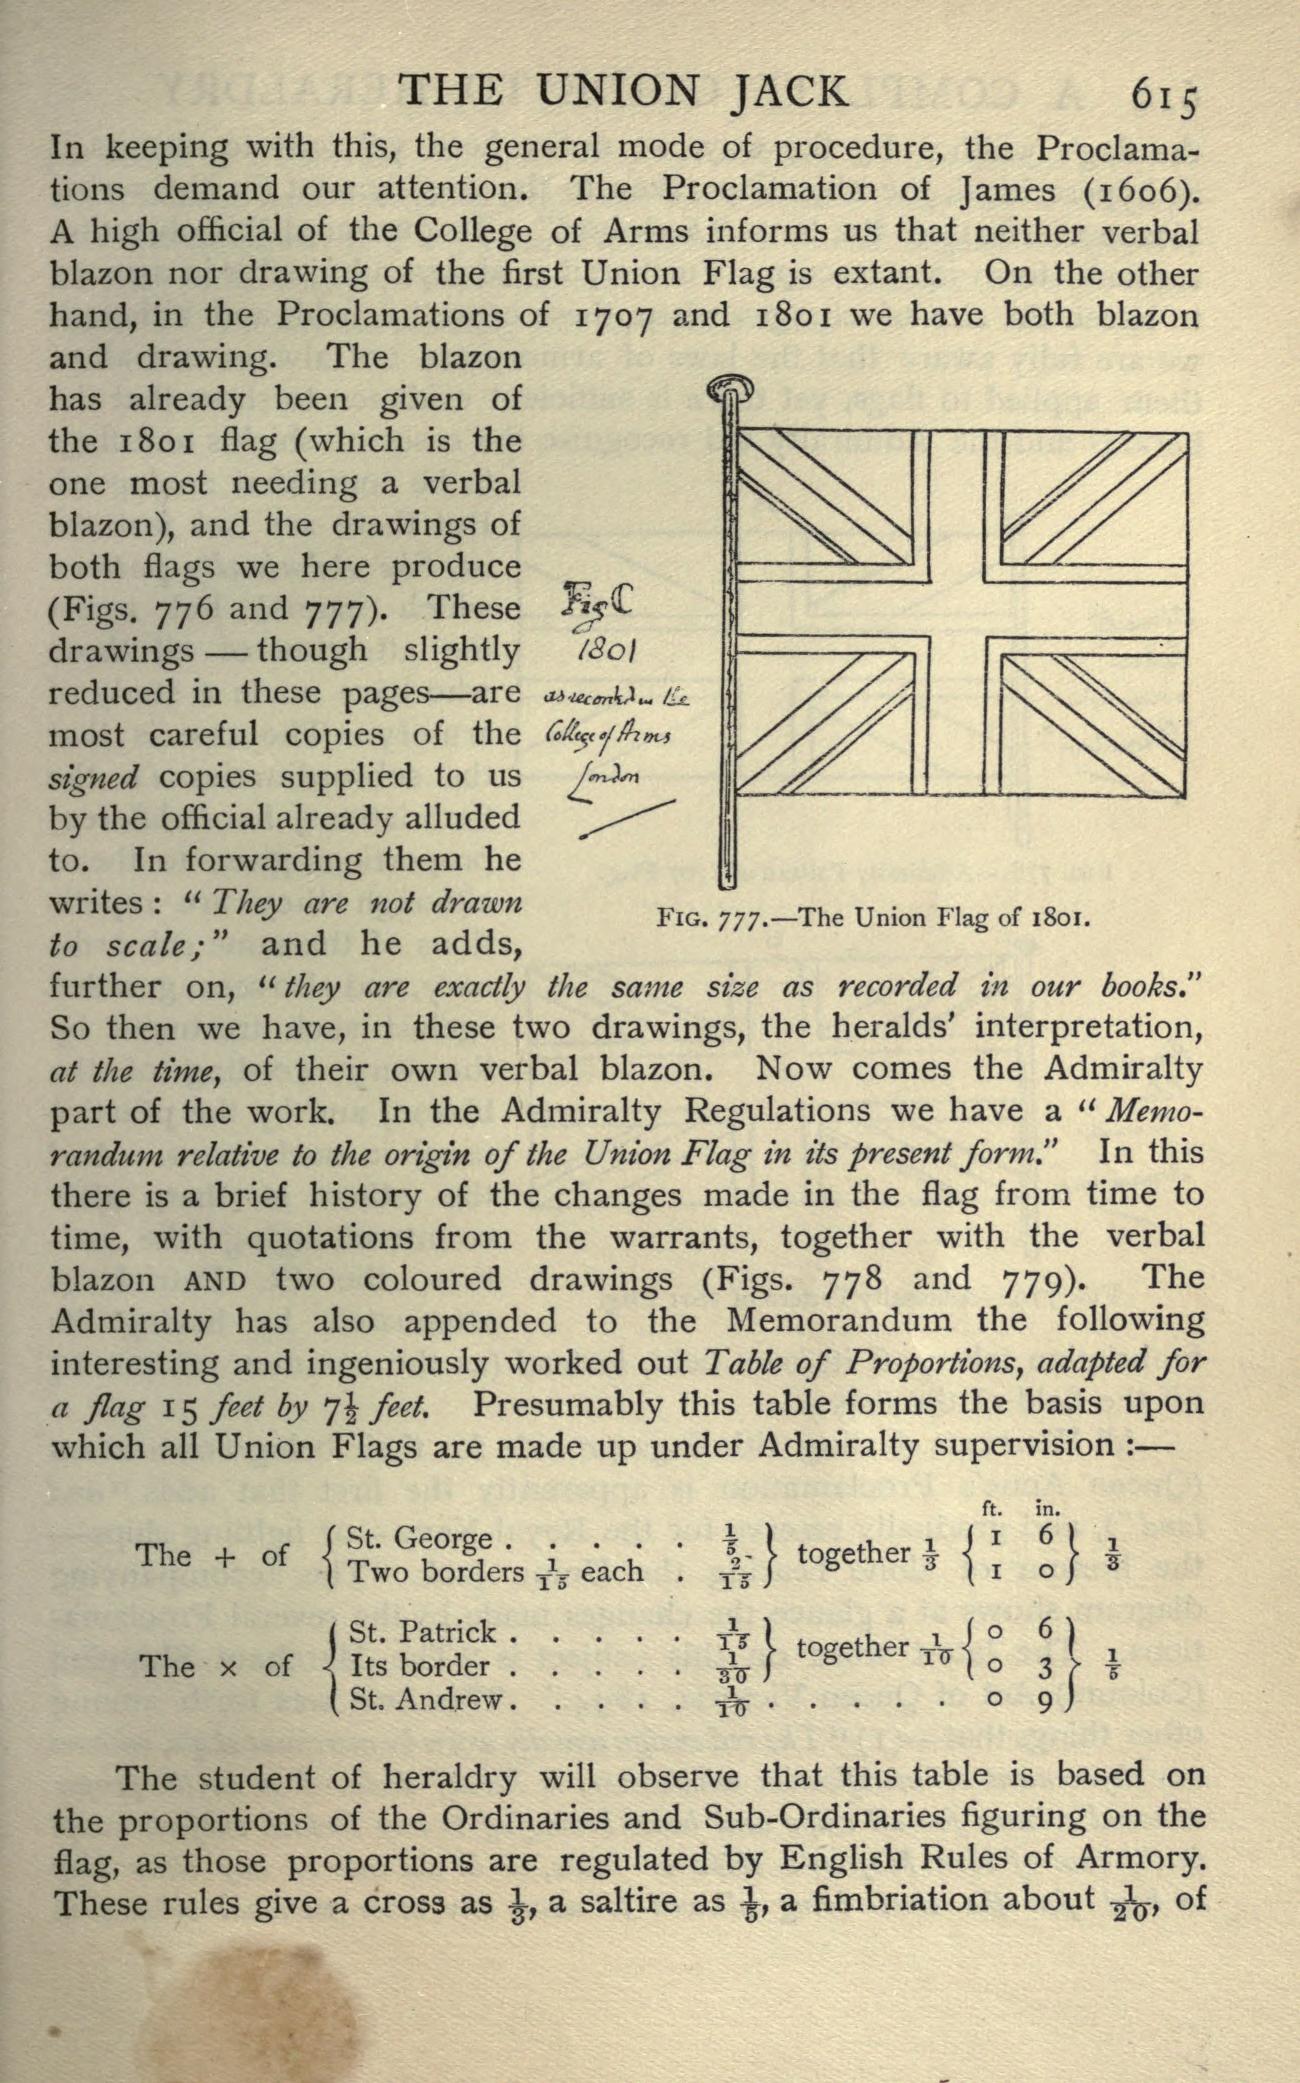 Image of A Complete Guide To Heraldry 1909 Union Jack Pg615